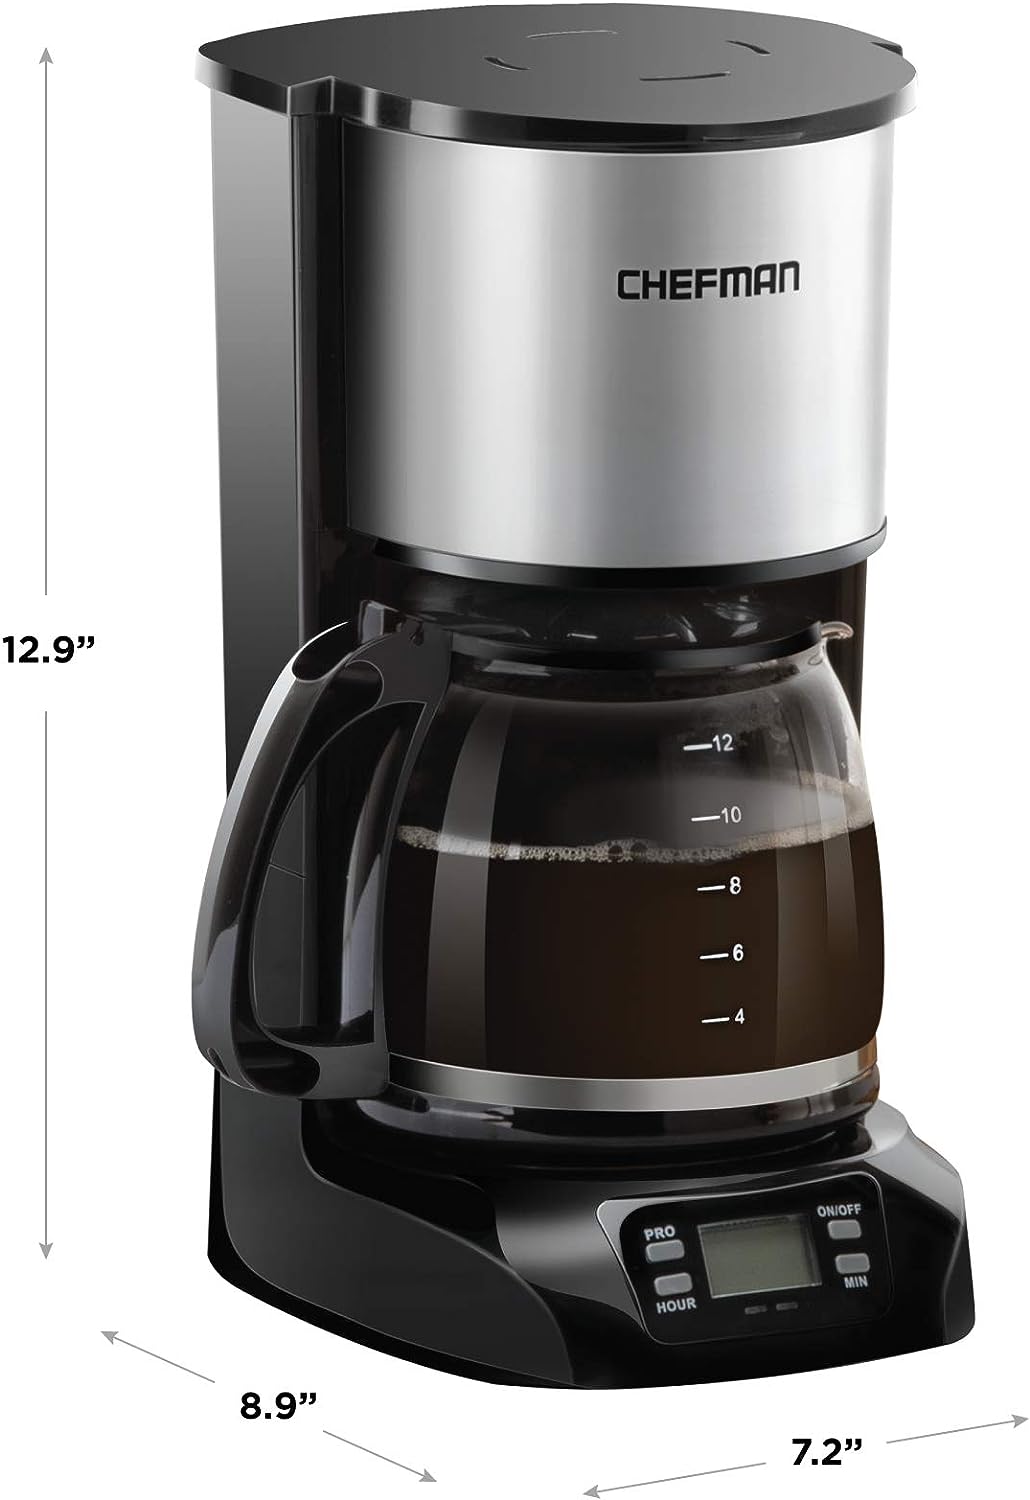 Chefman 12-Cup Coffee Maker Review